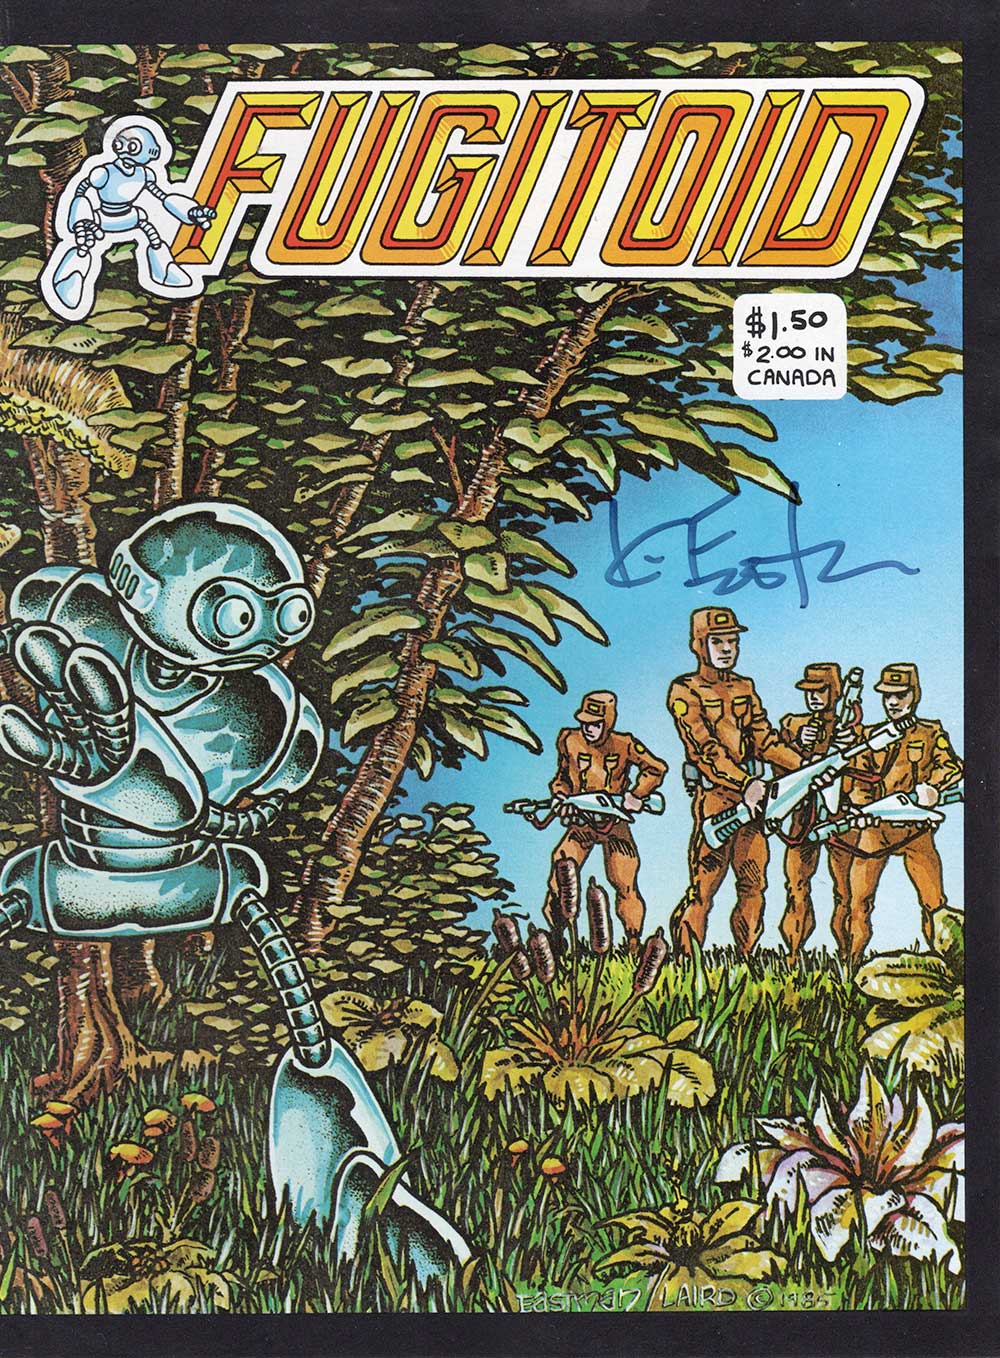 Fugitoid #1, 1985 Signed on Cover